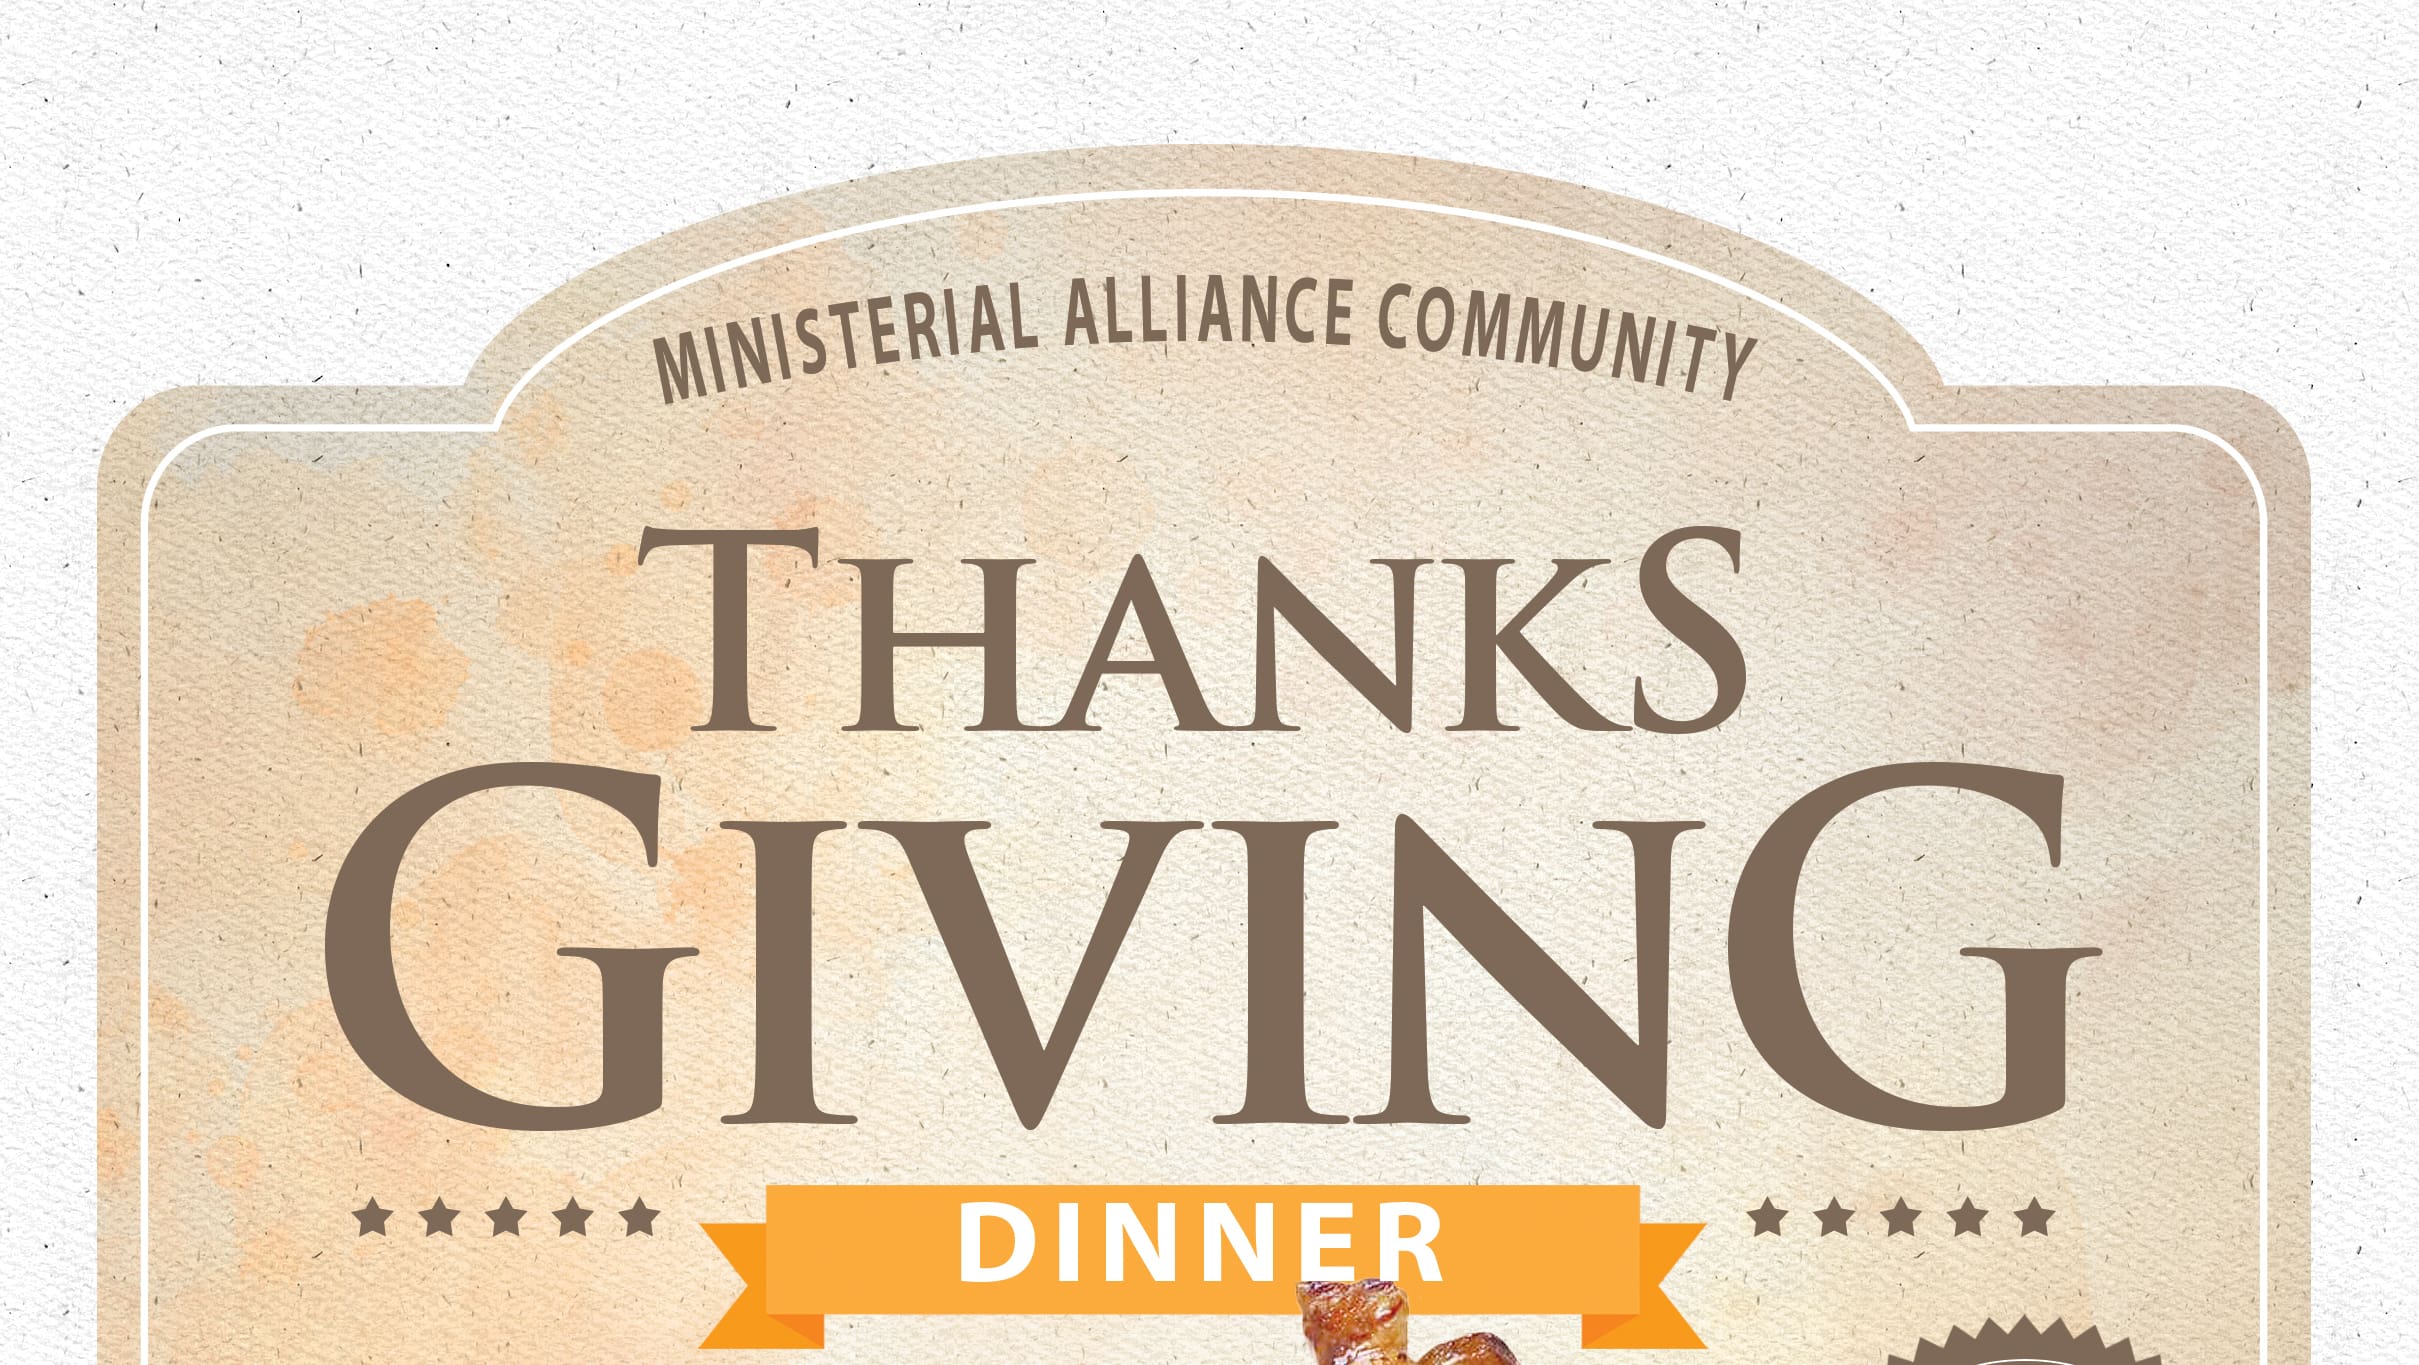 MINISTERIAL ALLIANCE COMMUNITY THANKSGIVING